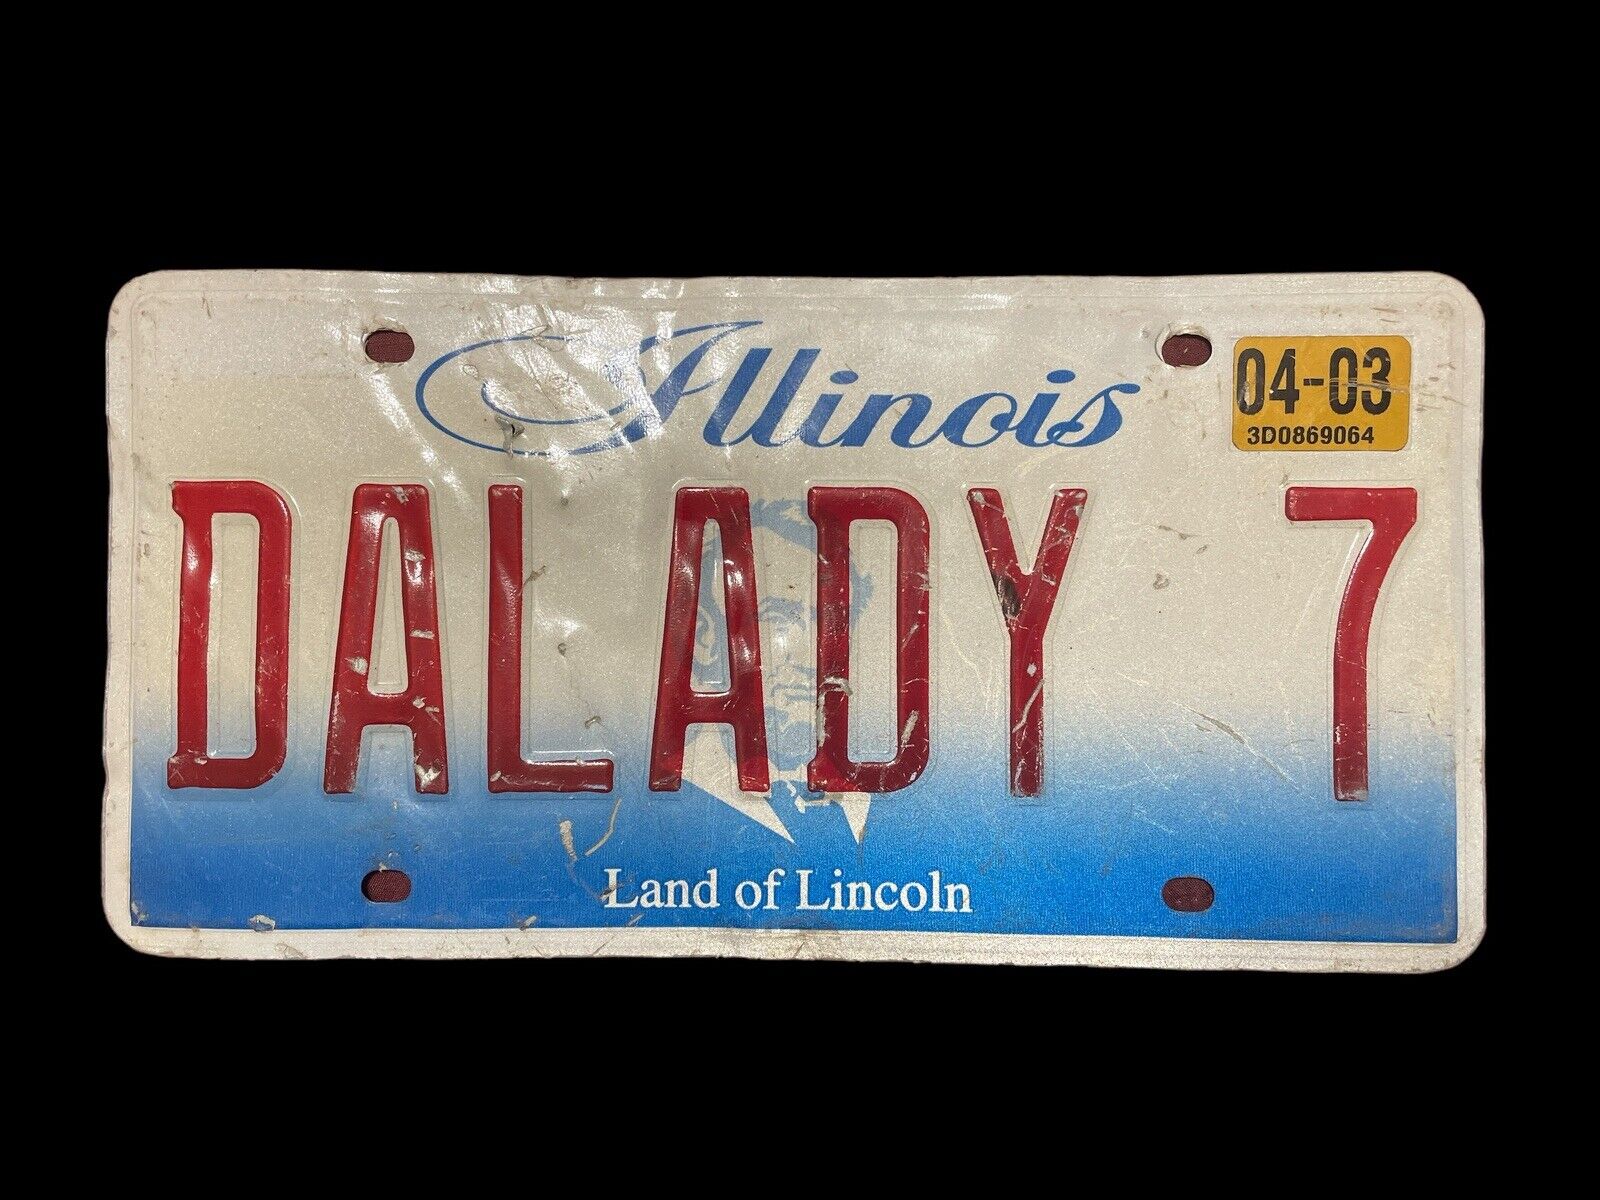 Vintage Illinois License Plate Tag Dalady 7 from 2003 Decent Condition